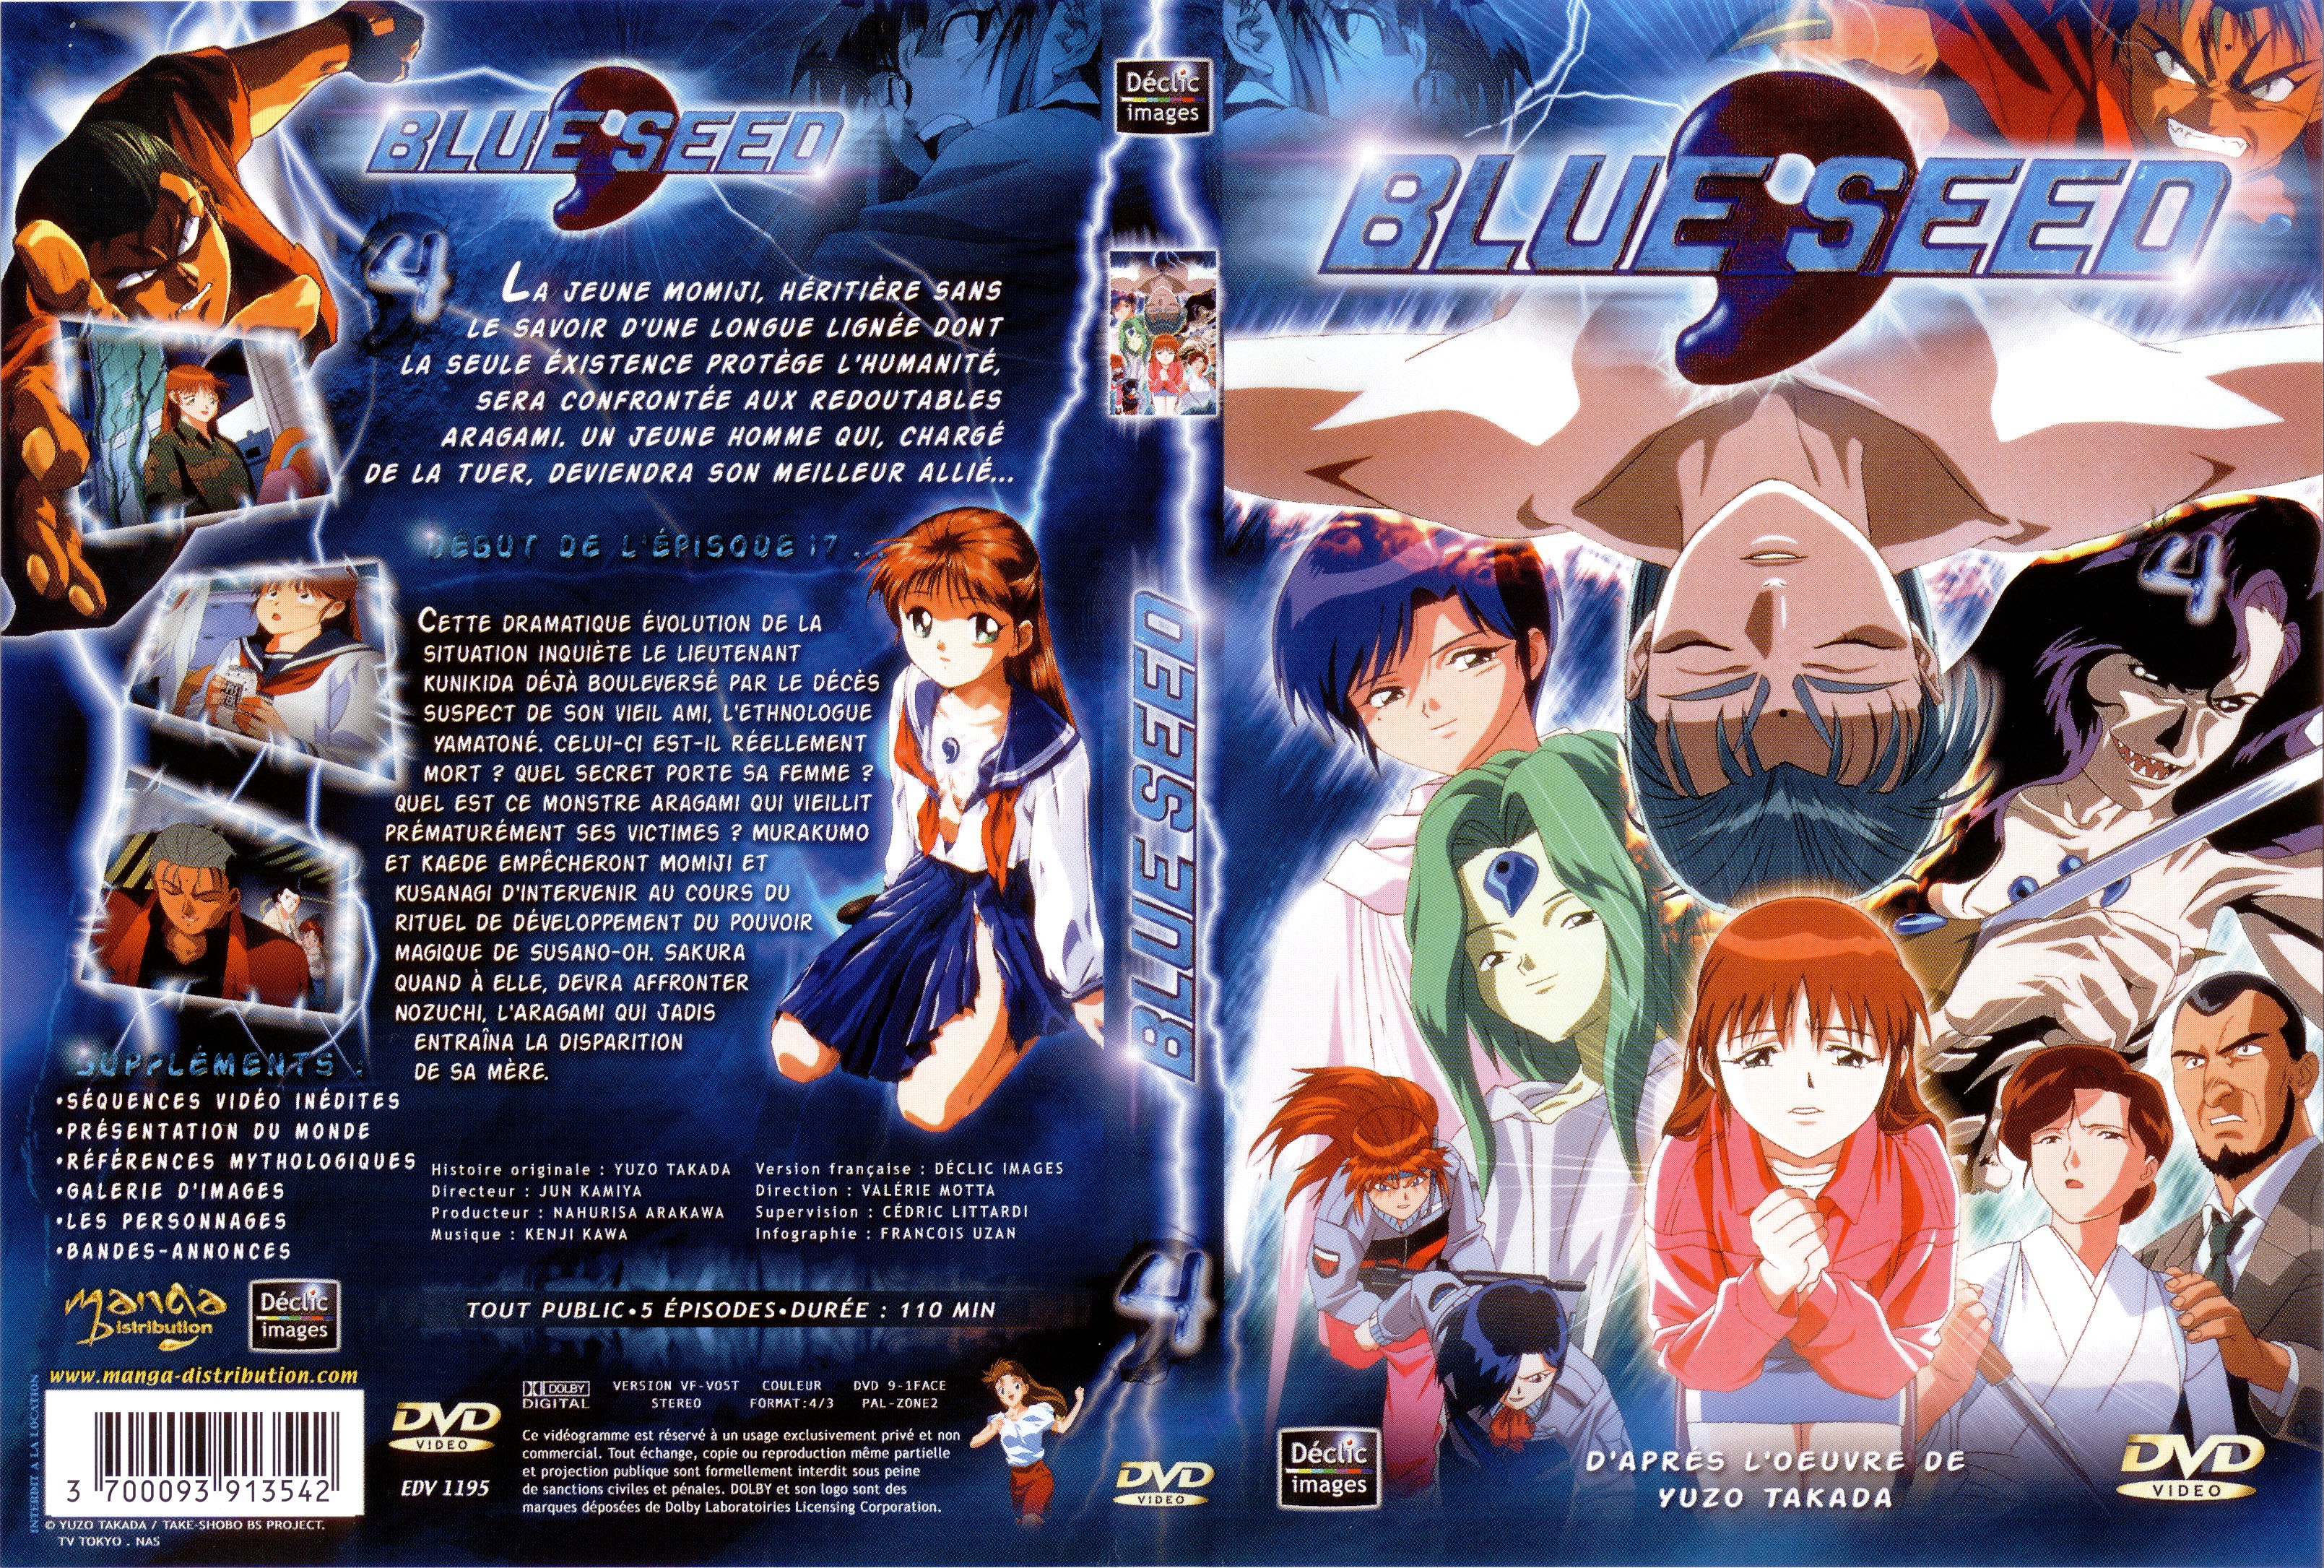 Jaquette DVD Blue seed vol 4